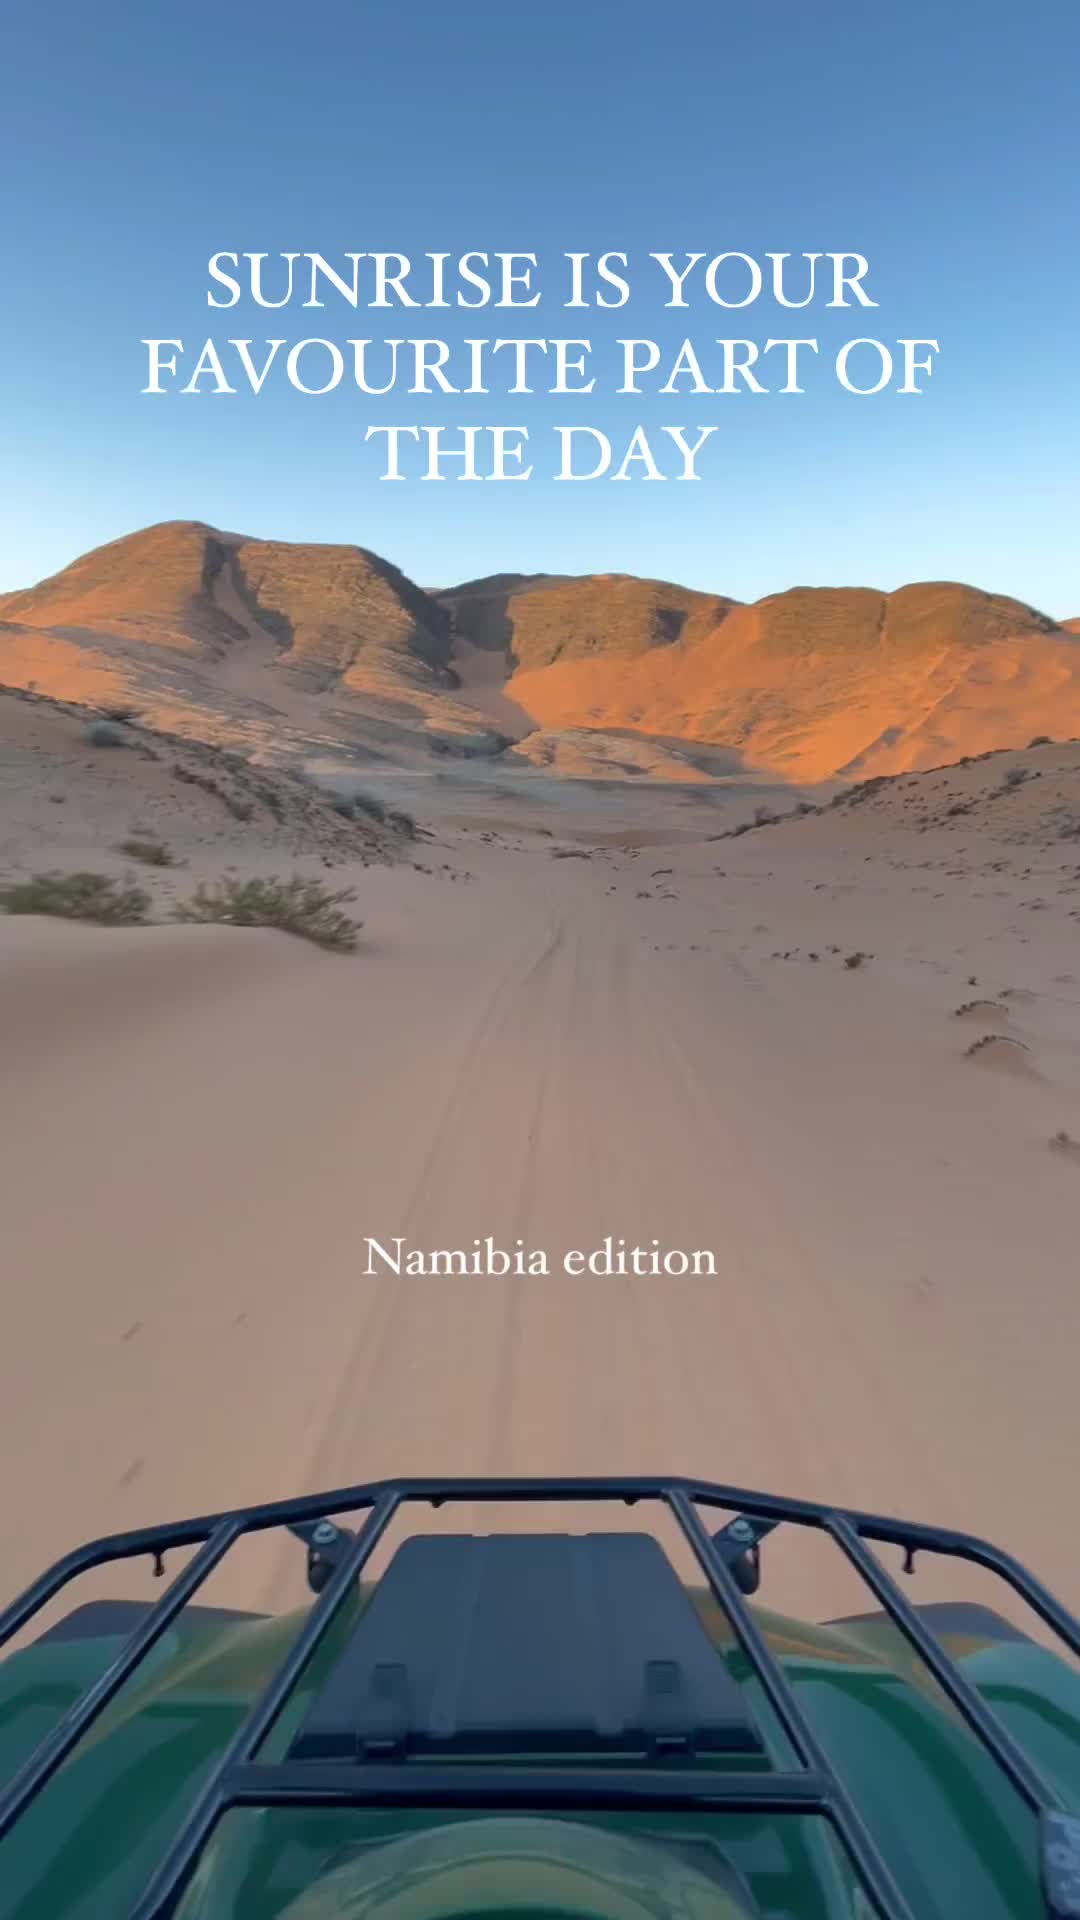 Early Bird Adventure in Namibia's Stunning Landscapes